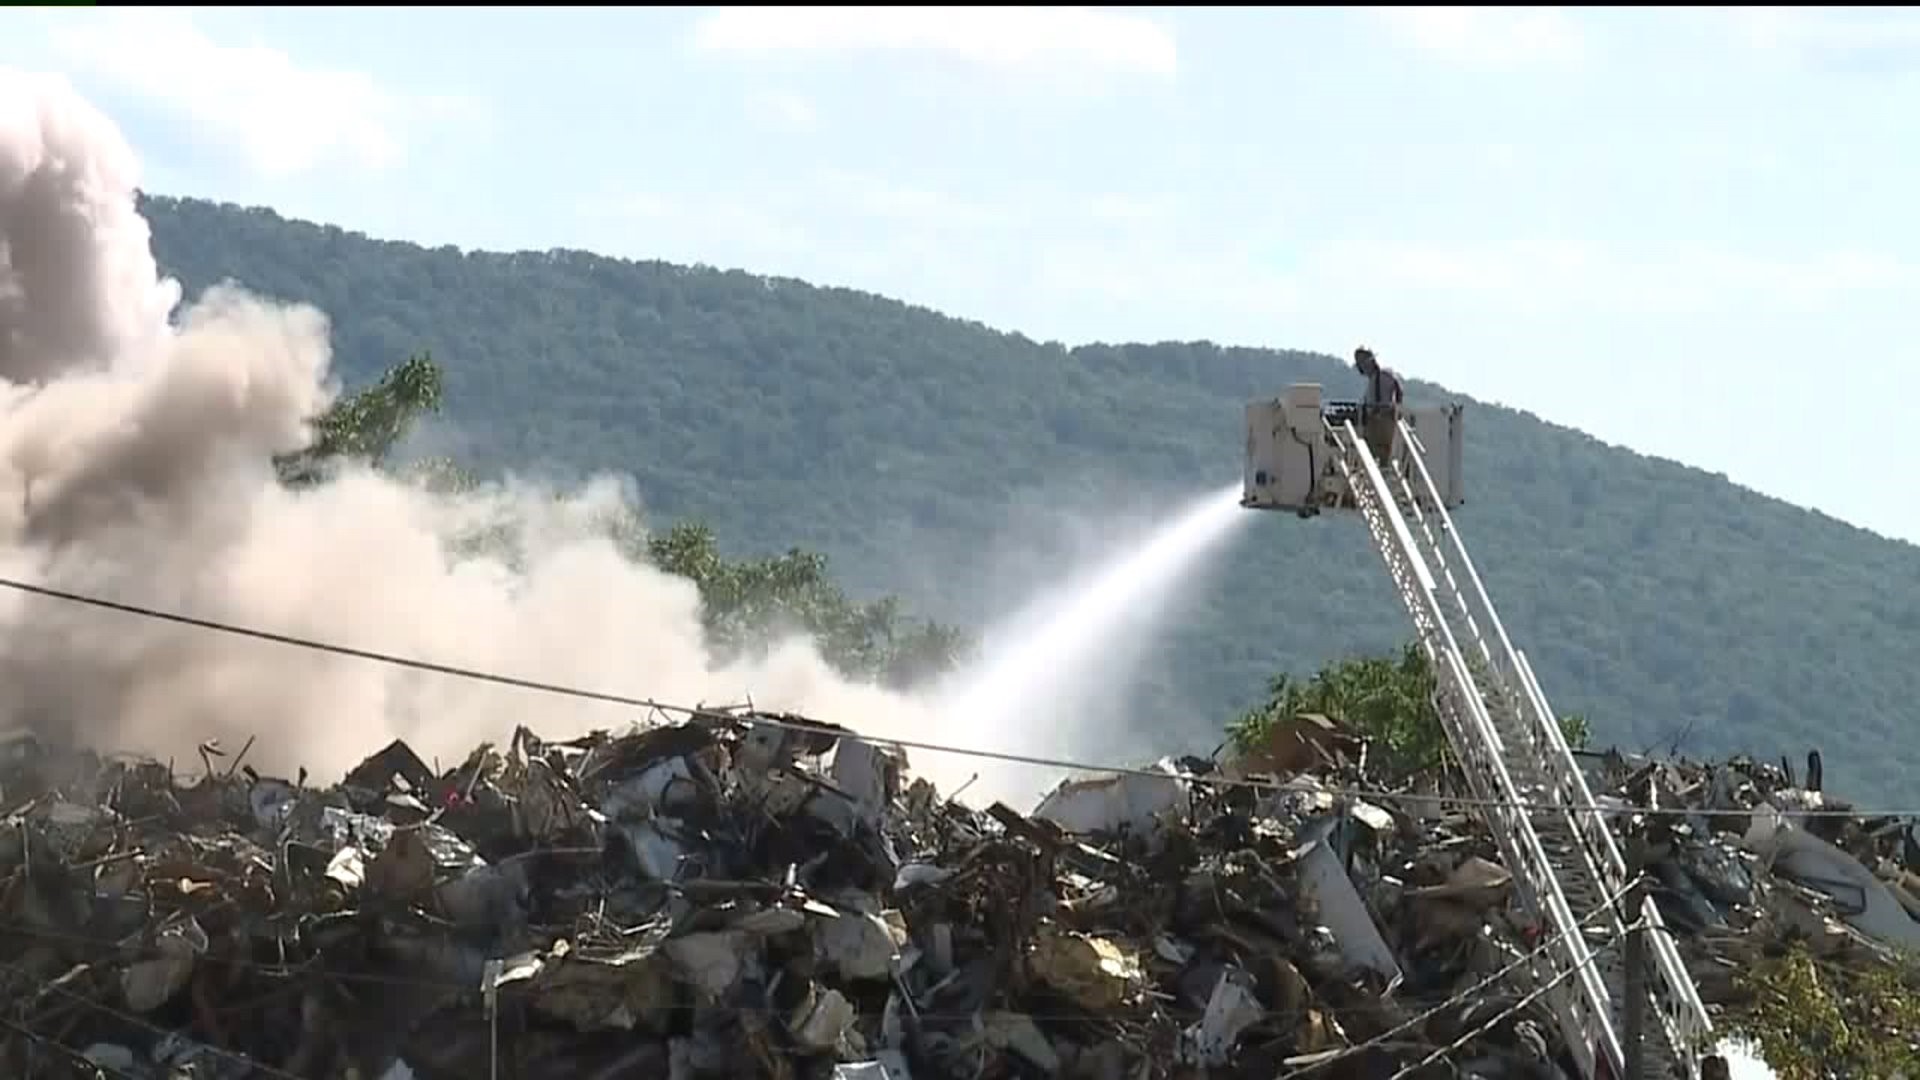 Fire at Recycling Facility in Williamsport